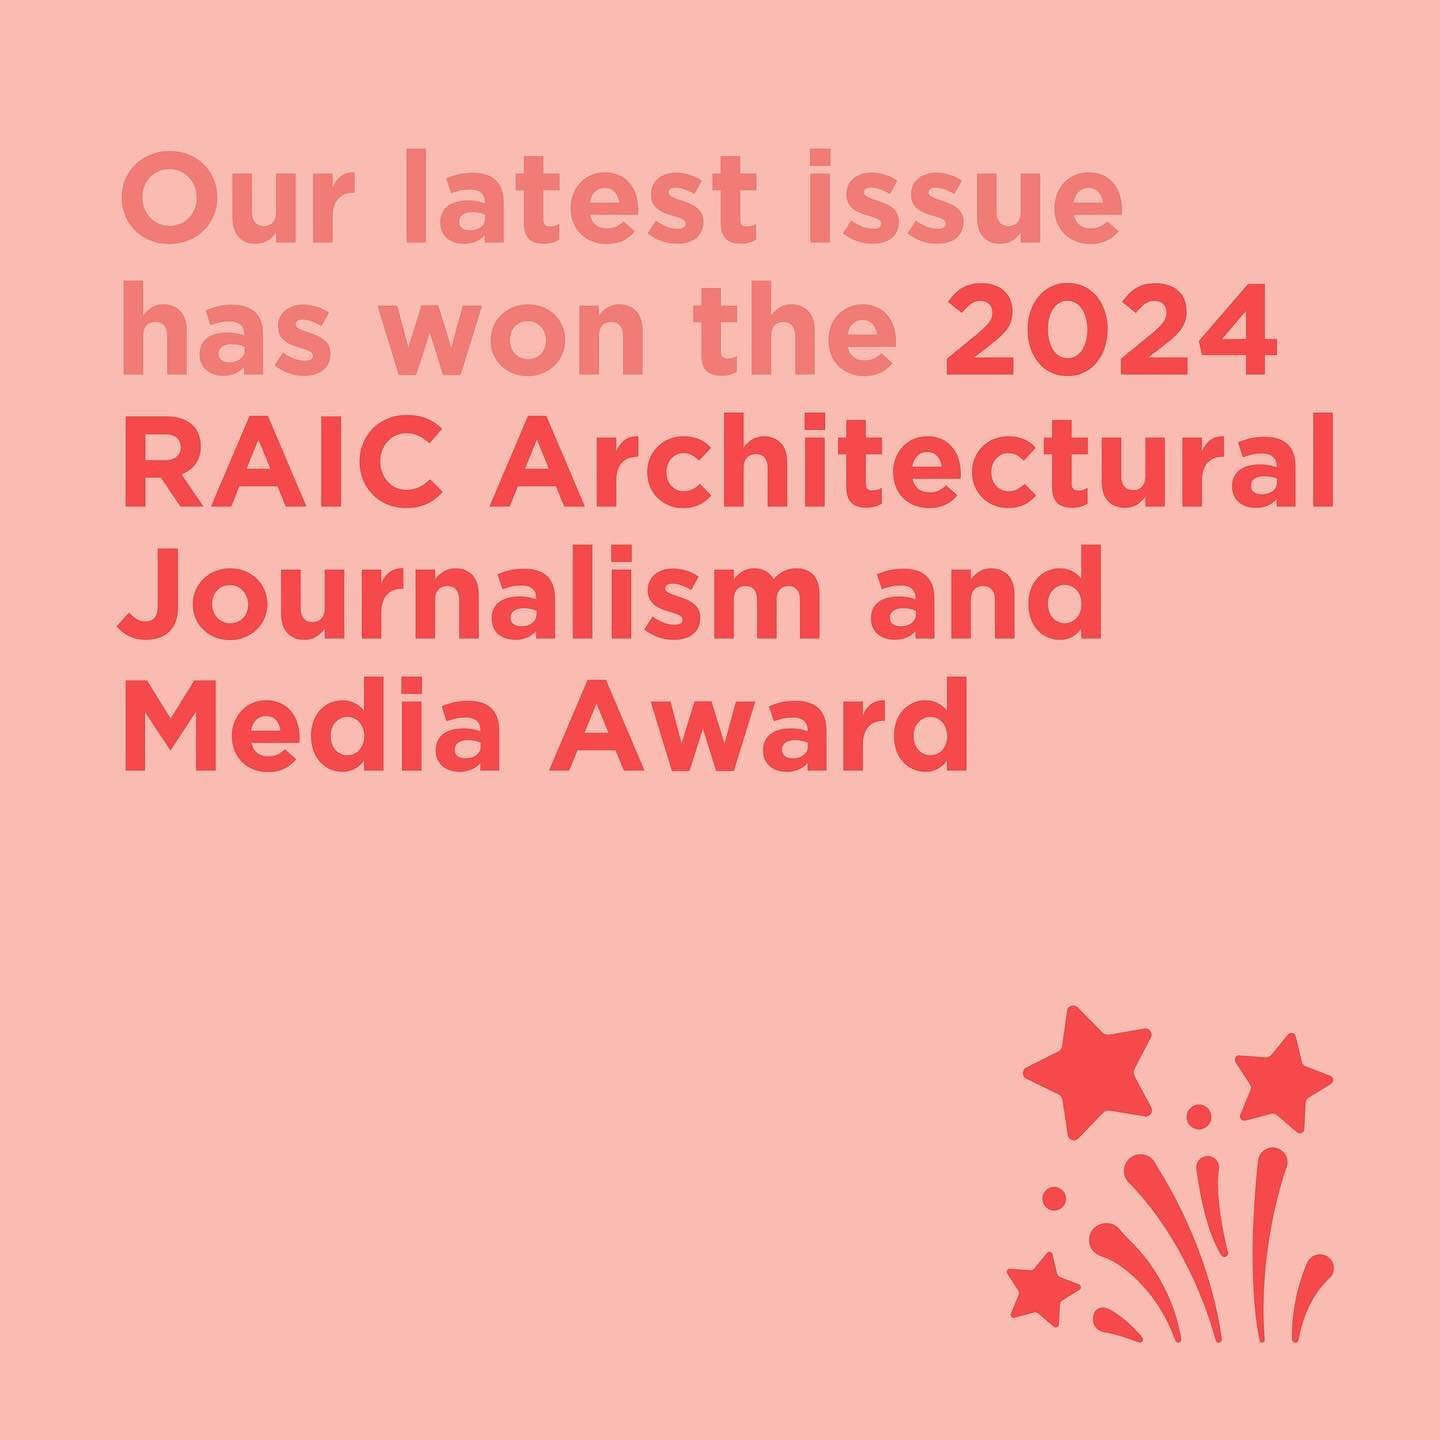 We are so excited to share that The Edit has been awarded the RAIC (Royal Architectural Institute of Canada) Architectural Journalism and Media Award! Check out all the articles on our website now 🎉